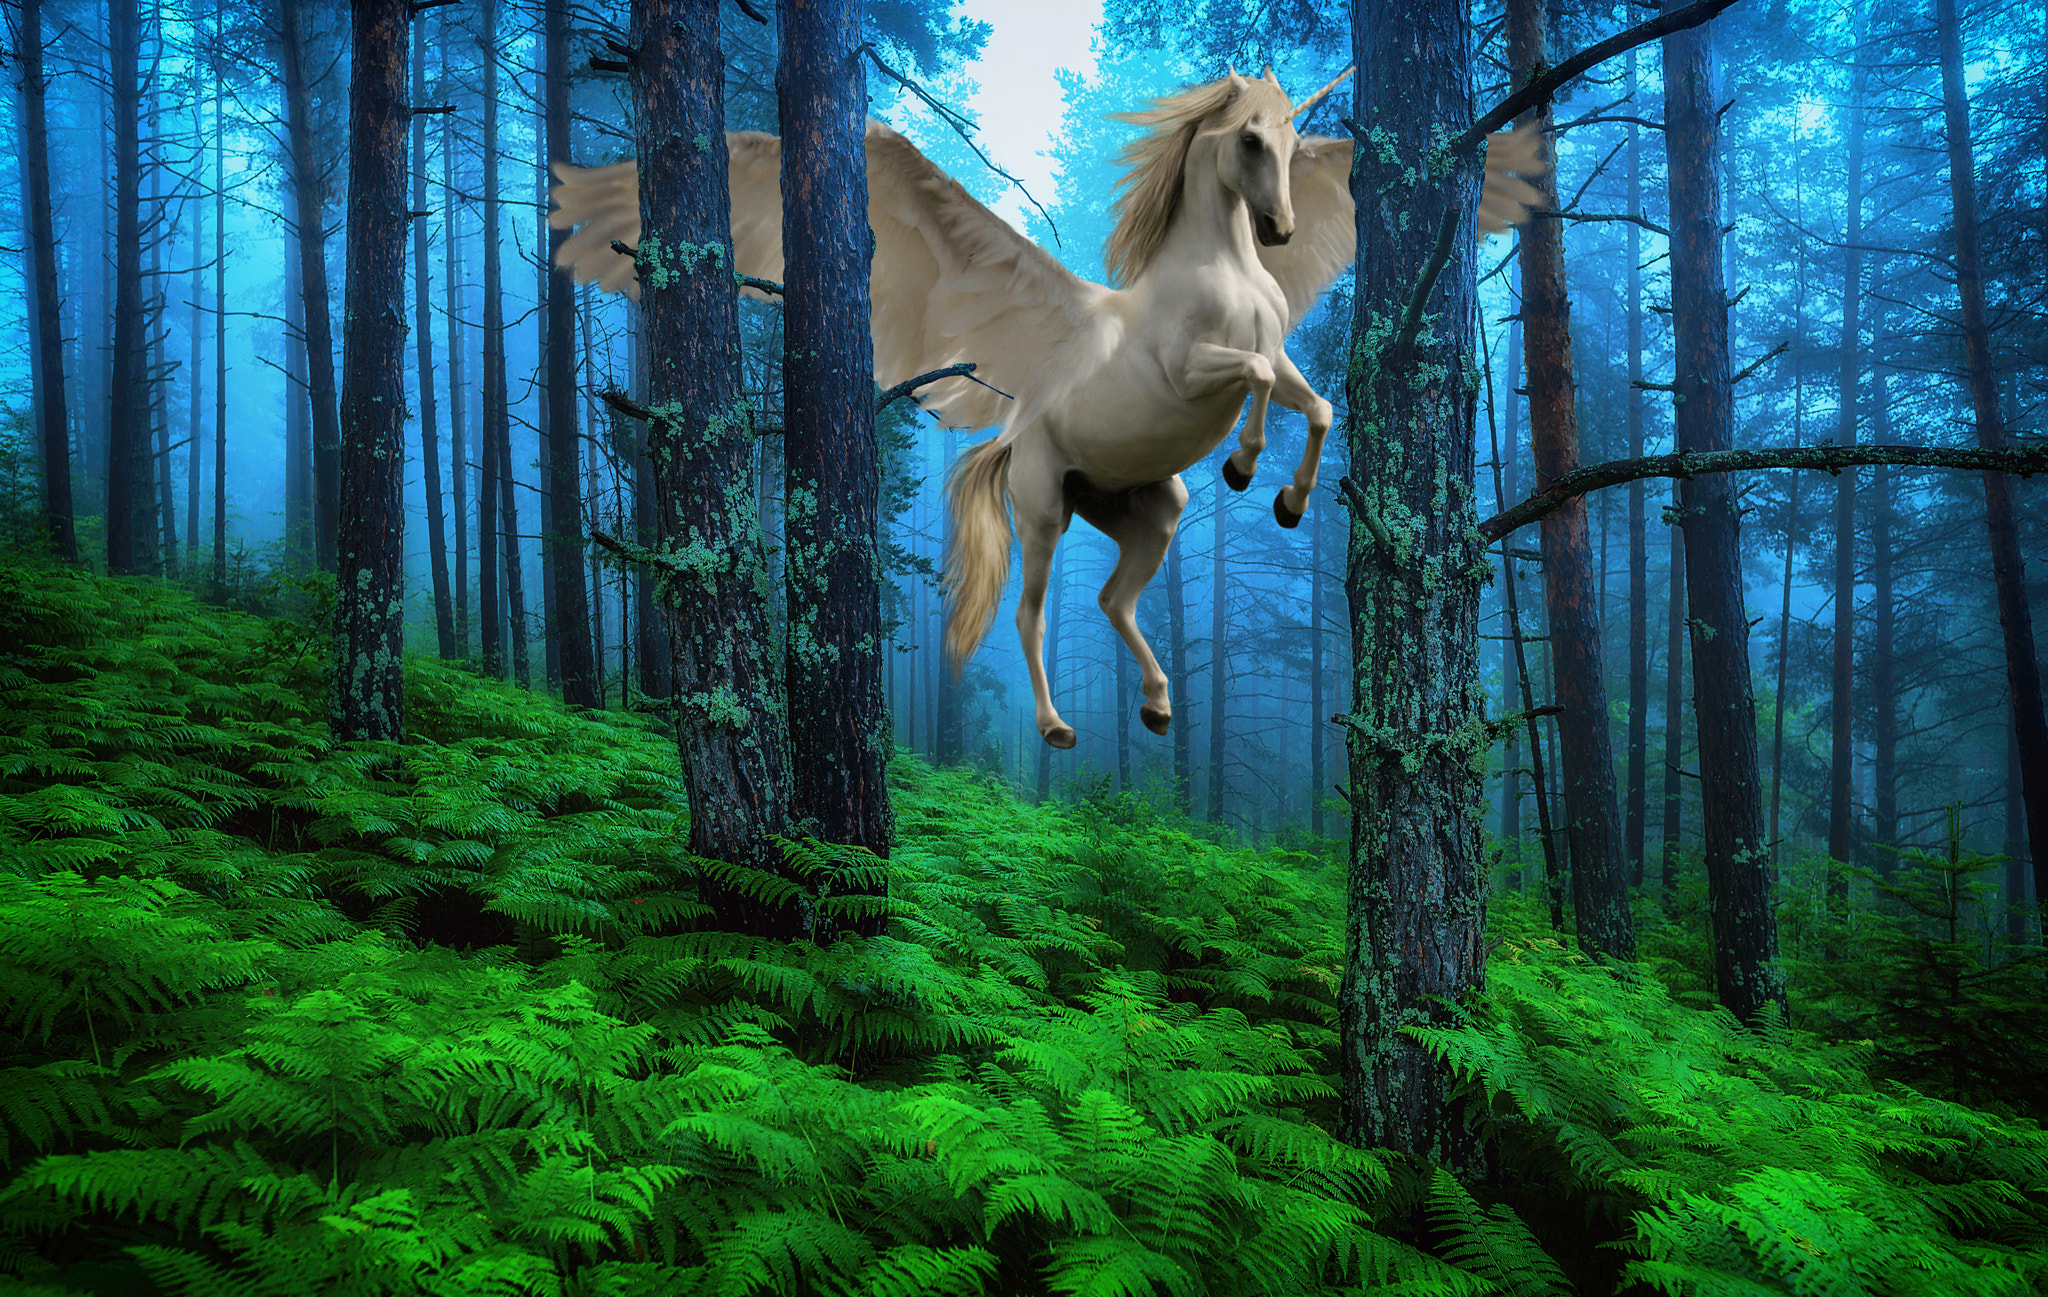 Wallpapers the winged horse photoshop trees on the desktop